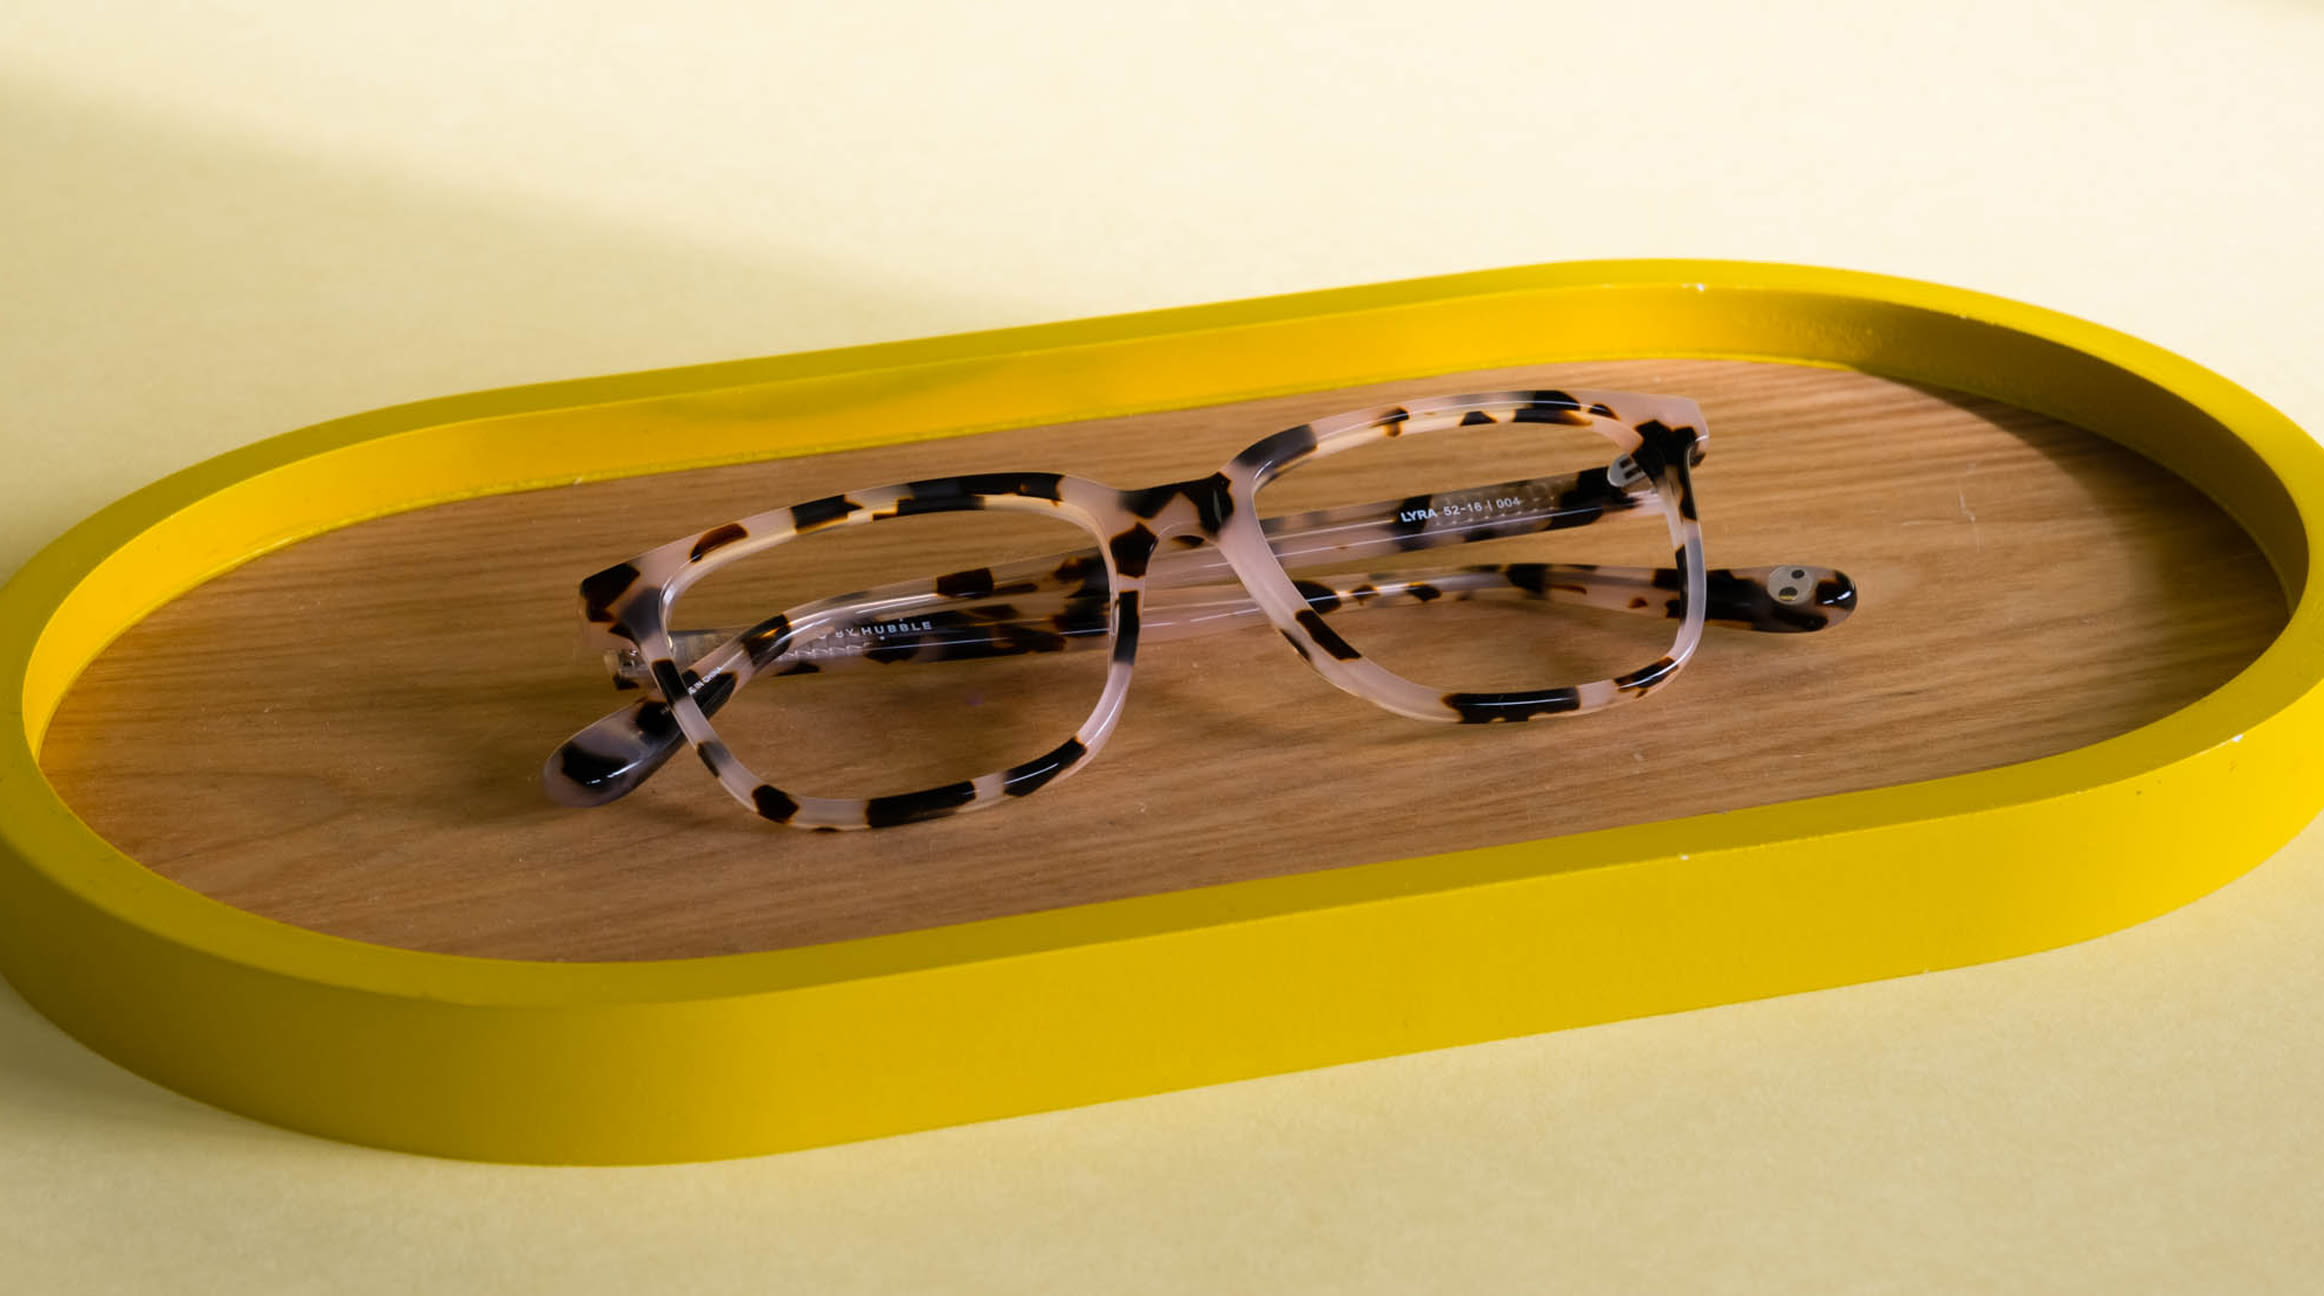 Remove Scratches from Eyeglasses and Sunglasses